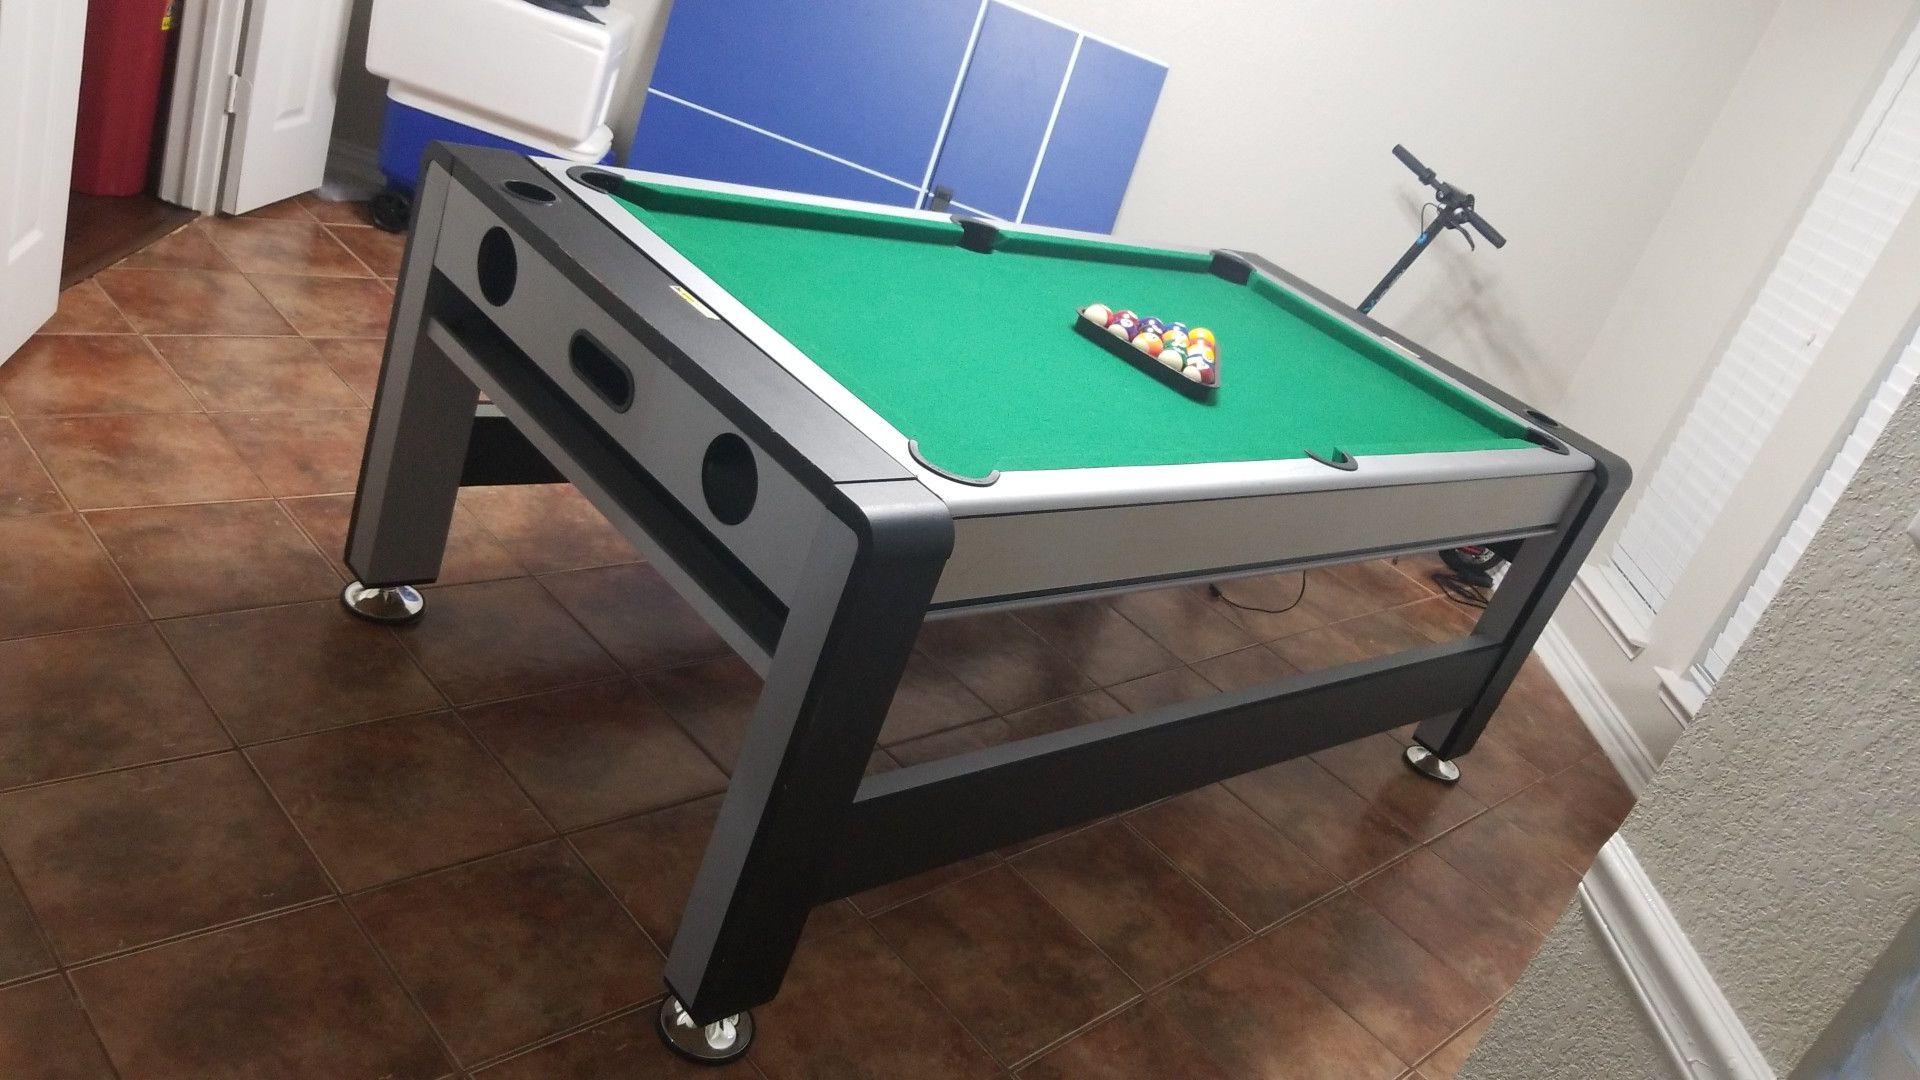 3 in 1 table. pool table, air hockey, ping pong